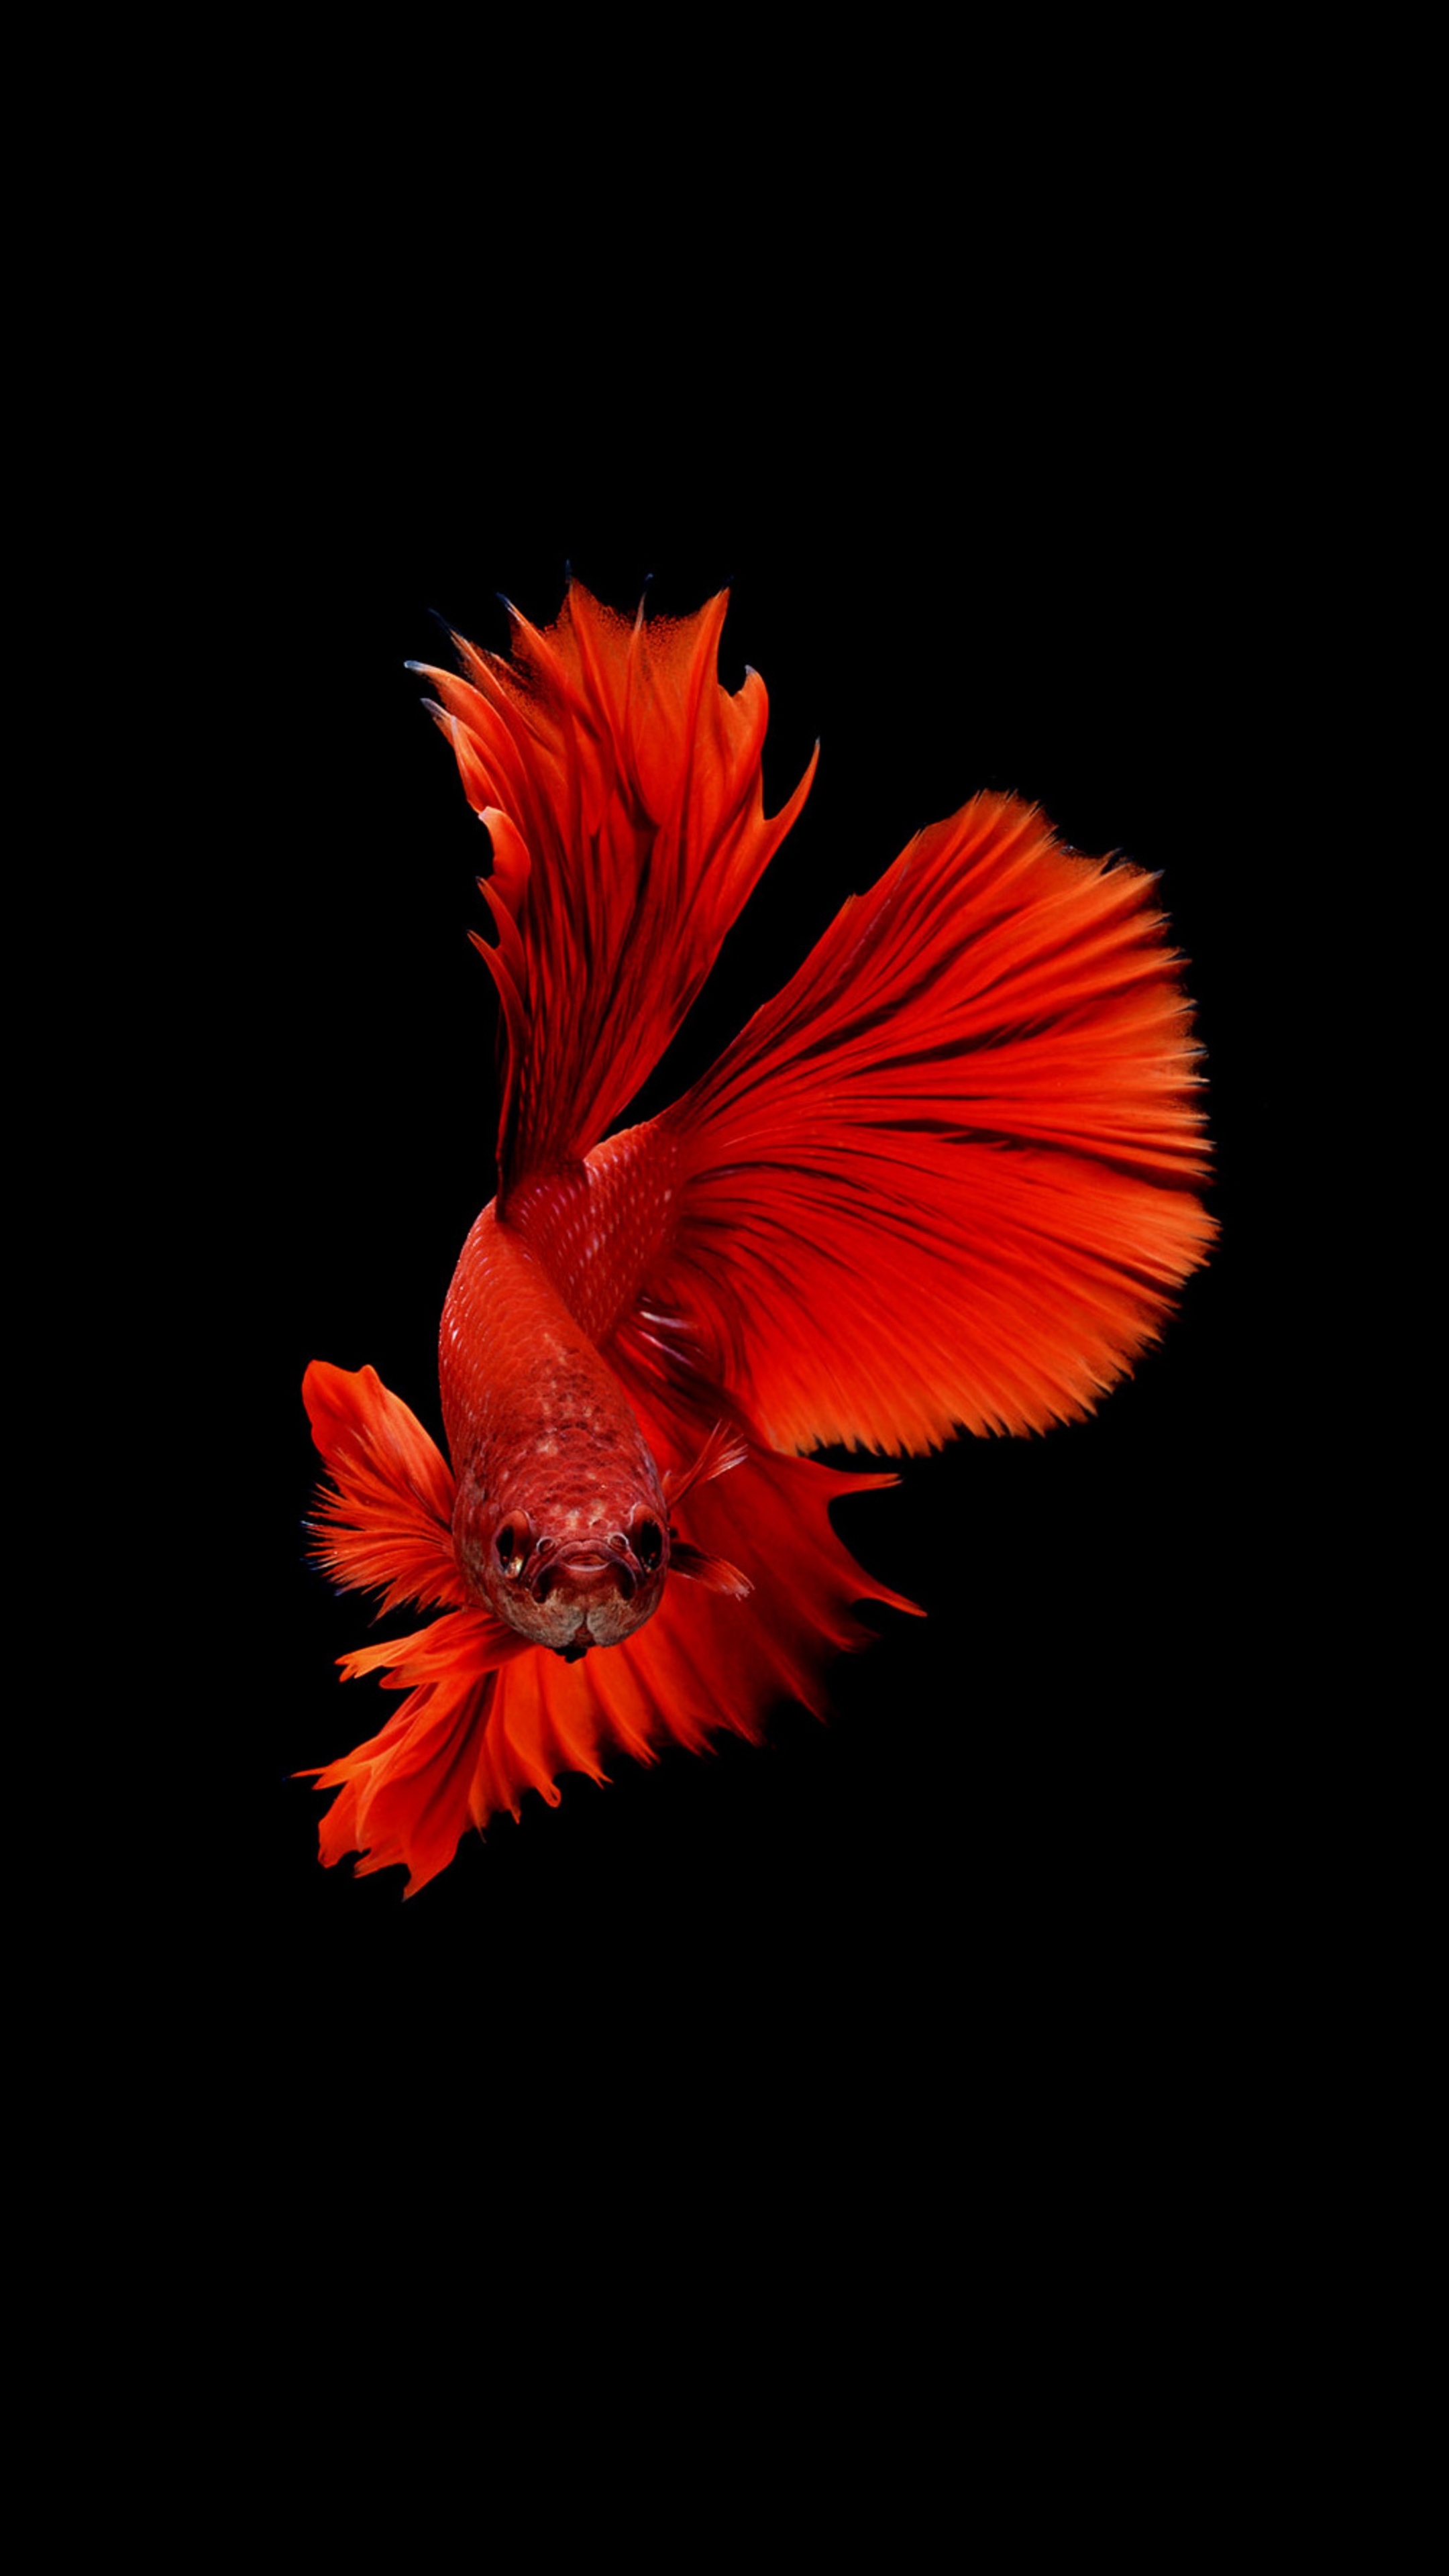 Betta fish Sony Xperia wallpapers, High-quality images, Elegant and vibrant, Stunning betta photography, 2160x3840 4K Phone